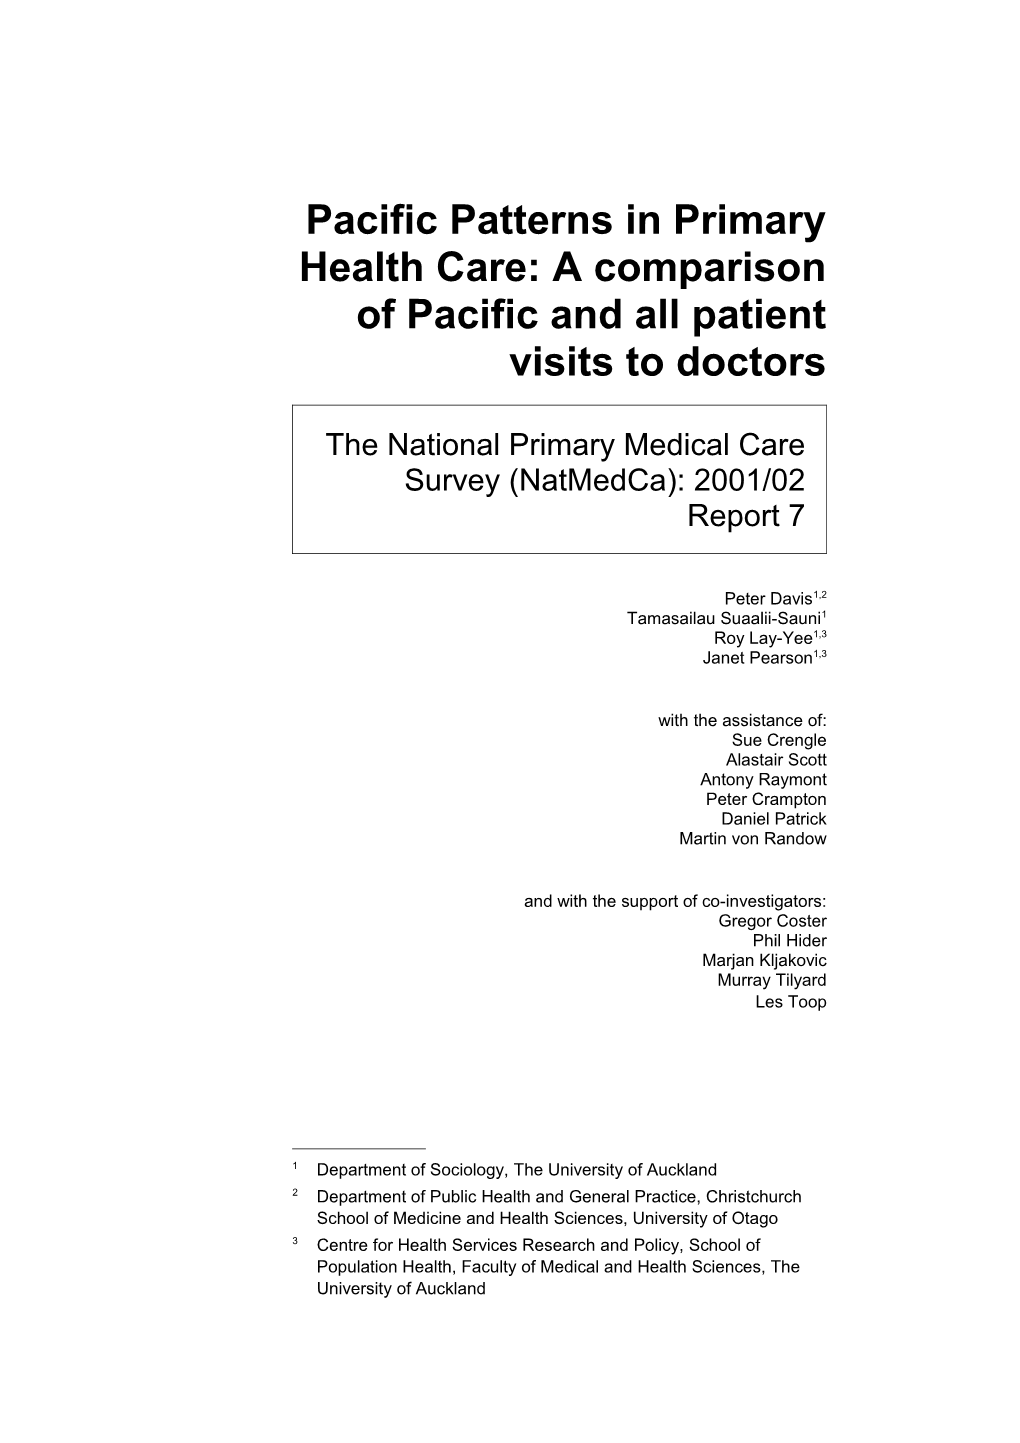 Pacific Patterns in Primary Health Care: a Comparison of Pacific and All Patient Visits